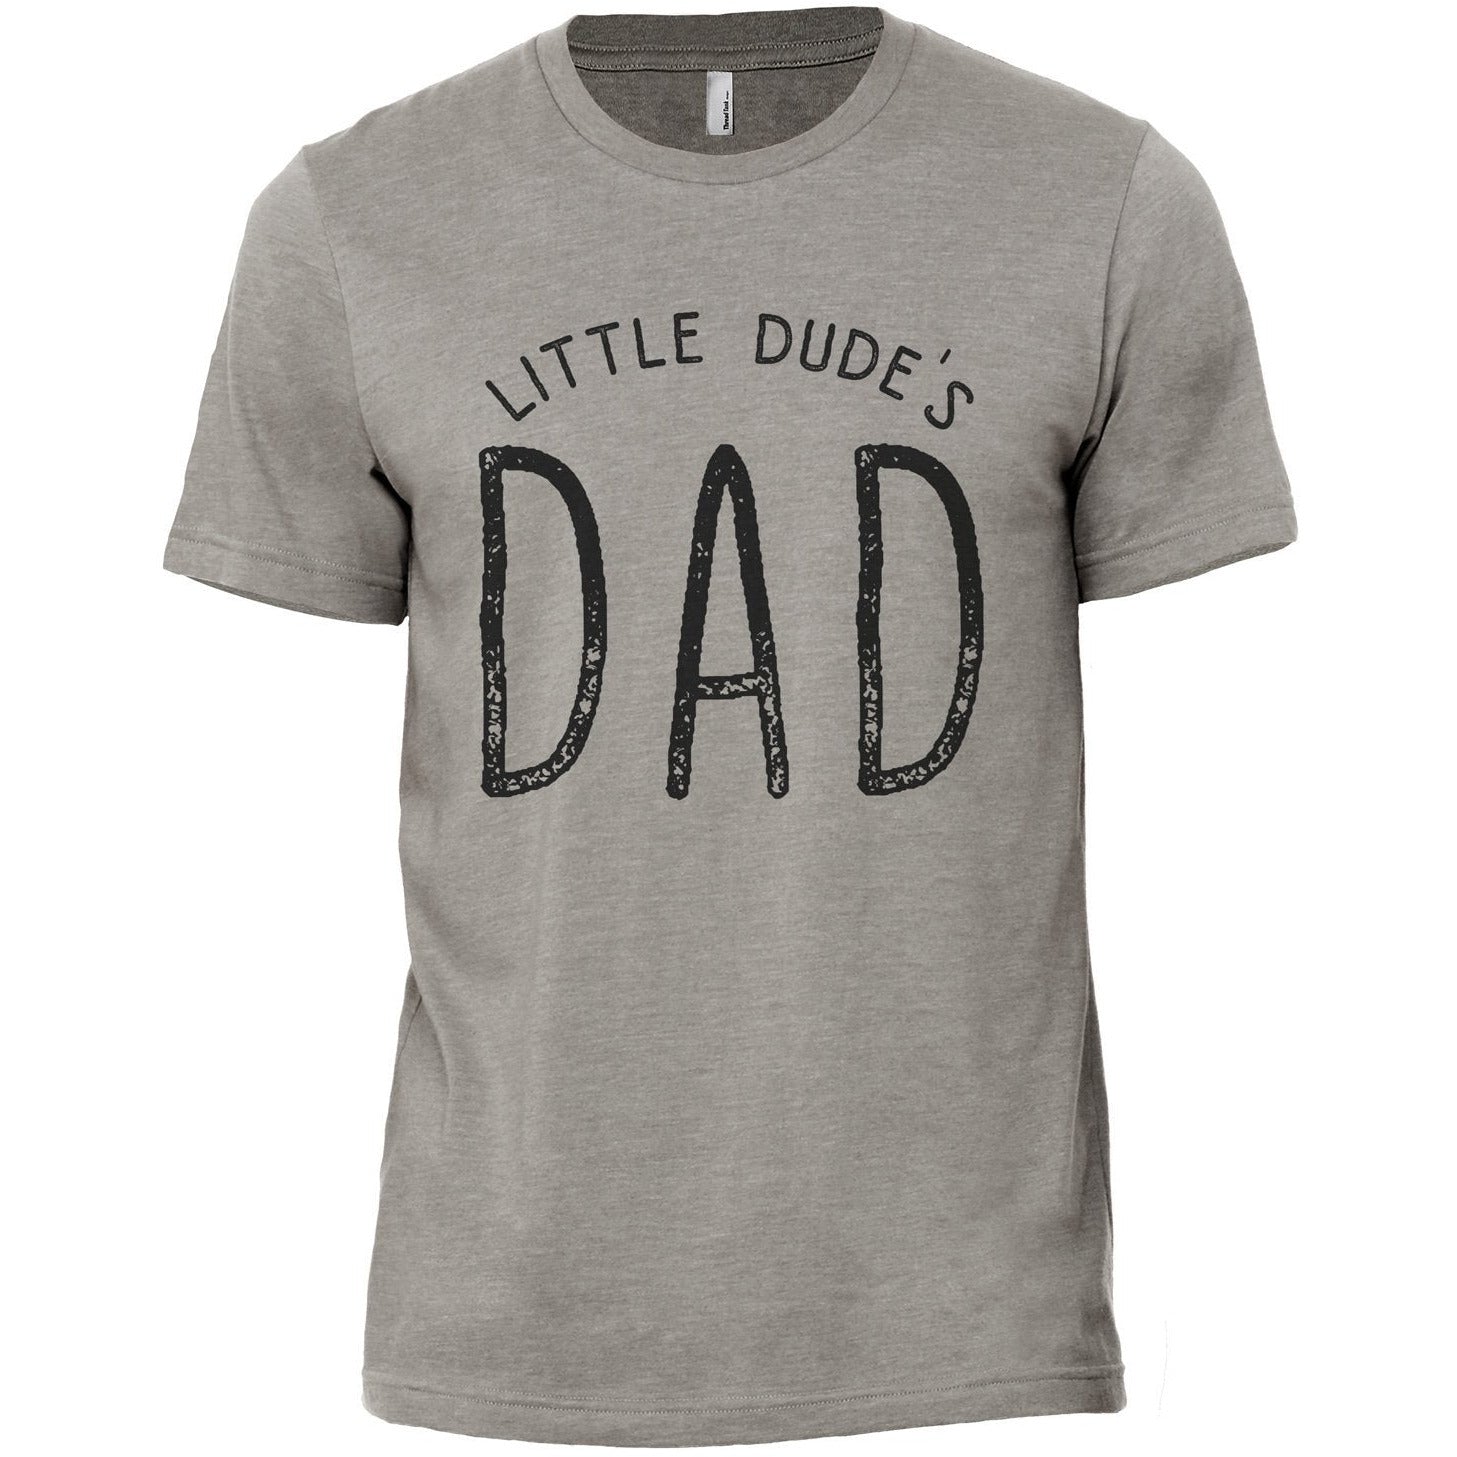 Lil Dude's Dad Military Grey Printed Graphic Men's Crew T-Shirt Tee